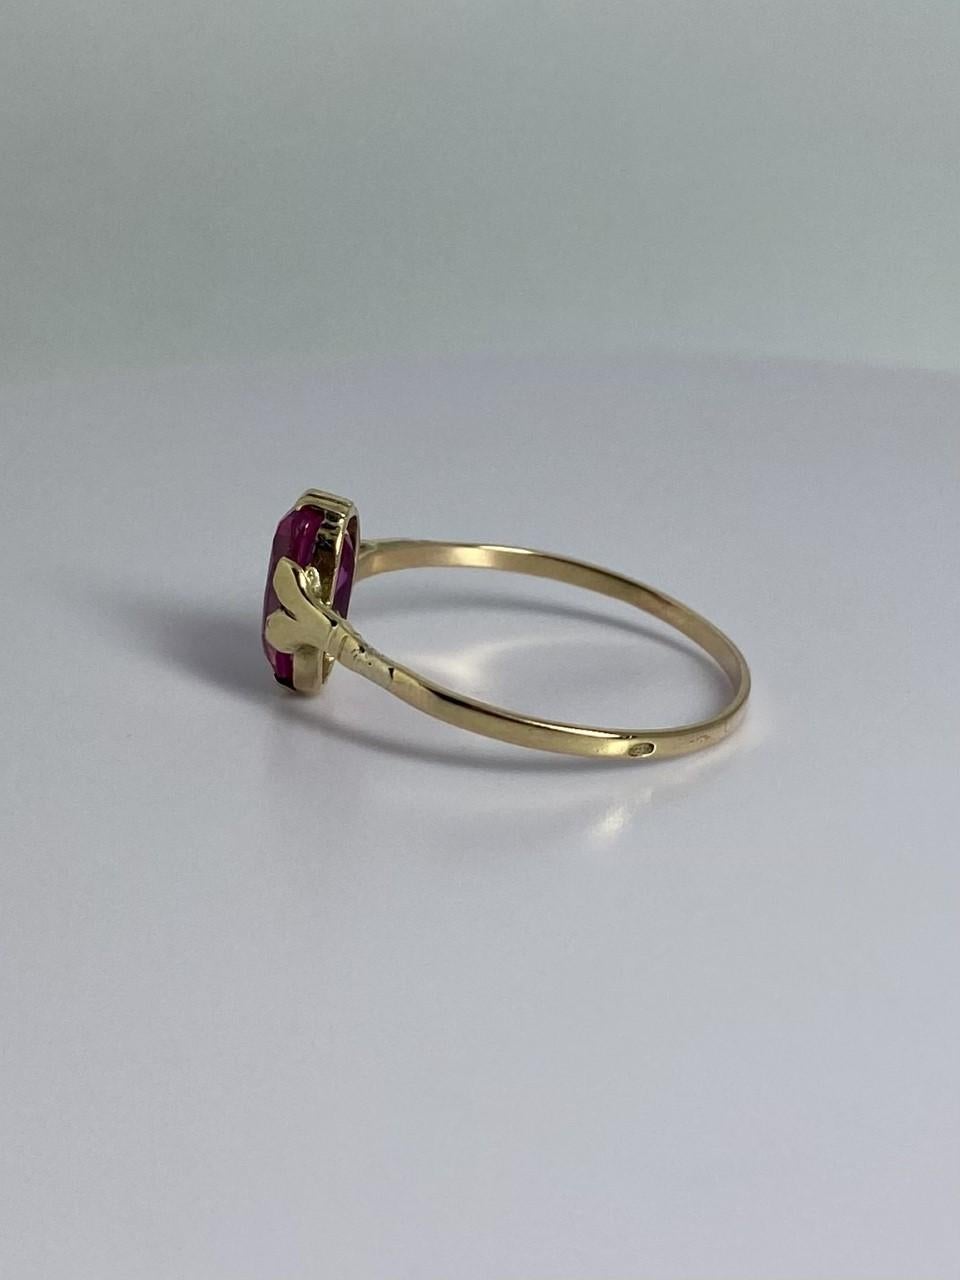 Women's or Men's Pre-loved European ring made of 14 carat gold with pink sapphire of 1.76 carat For Sale